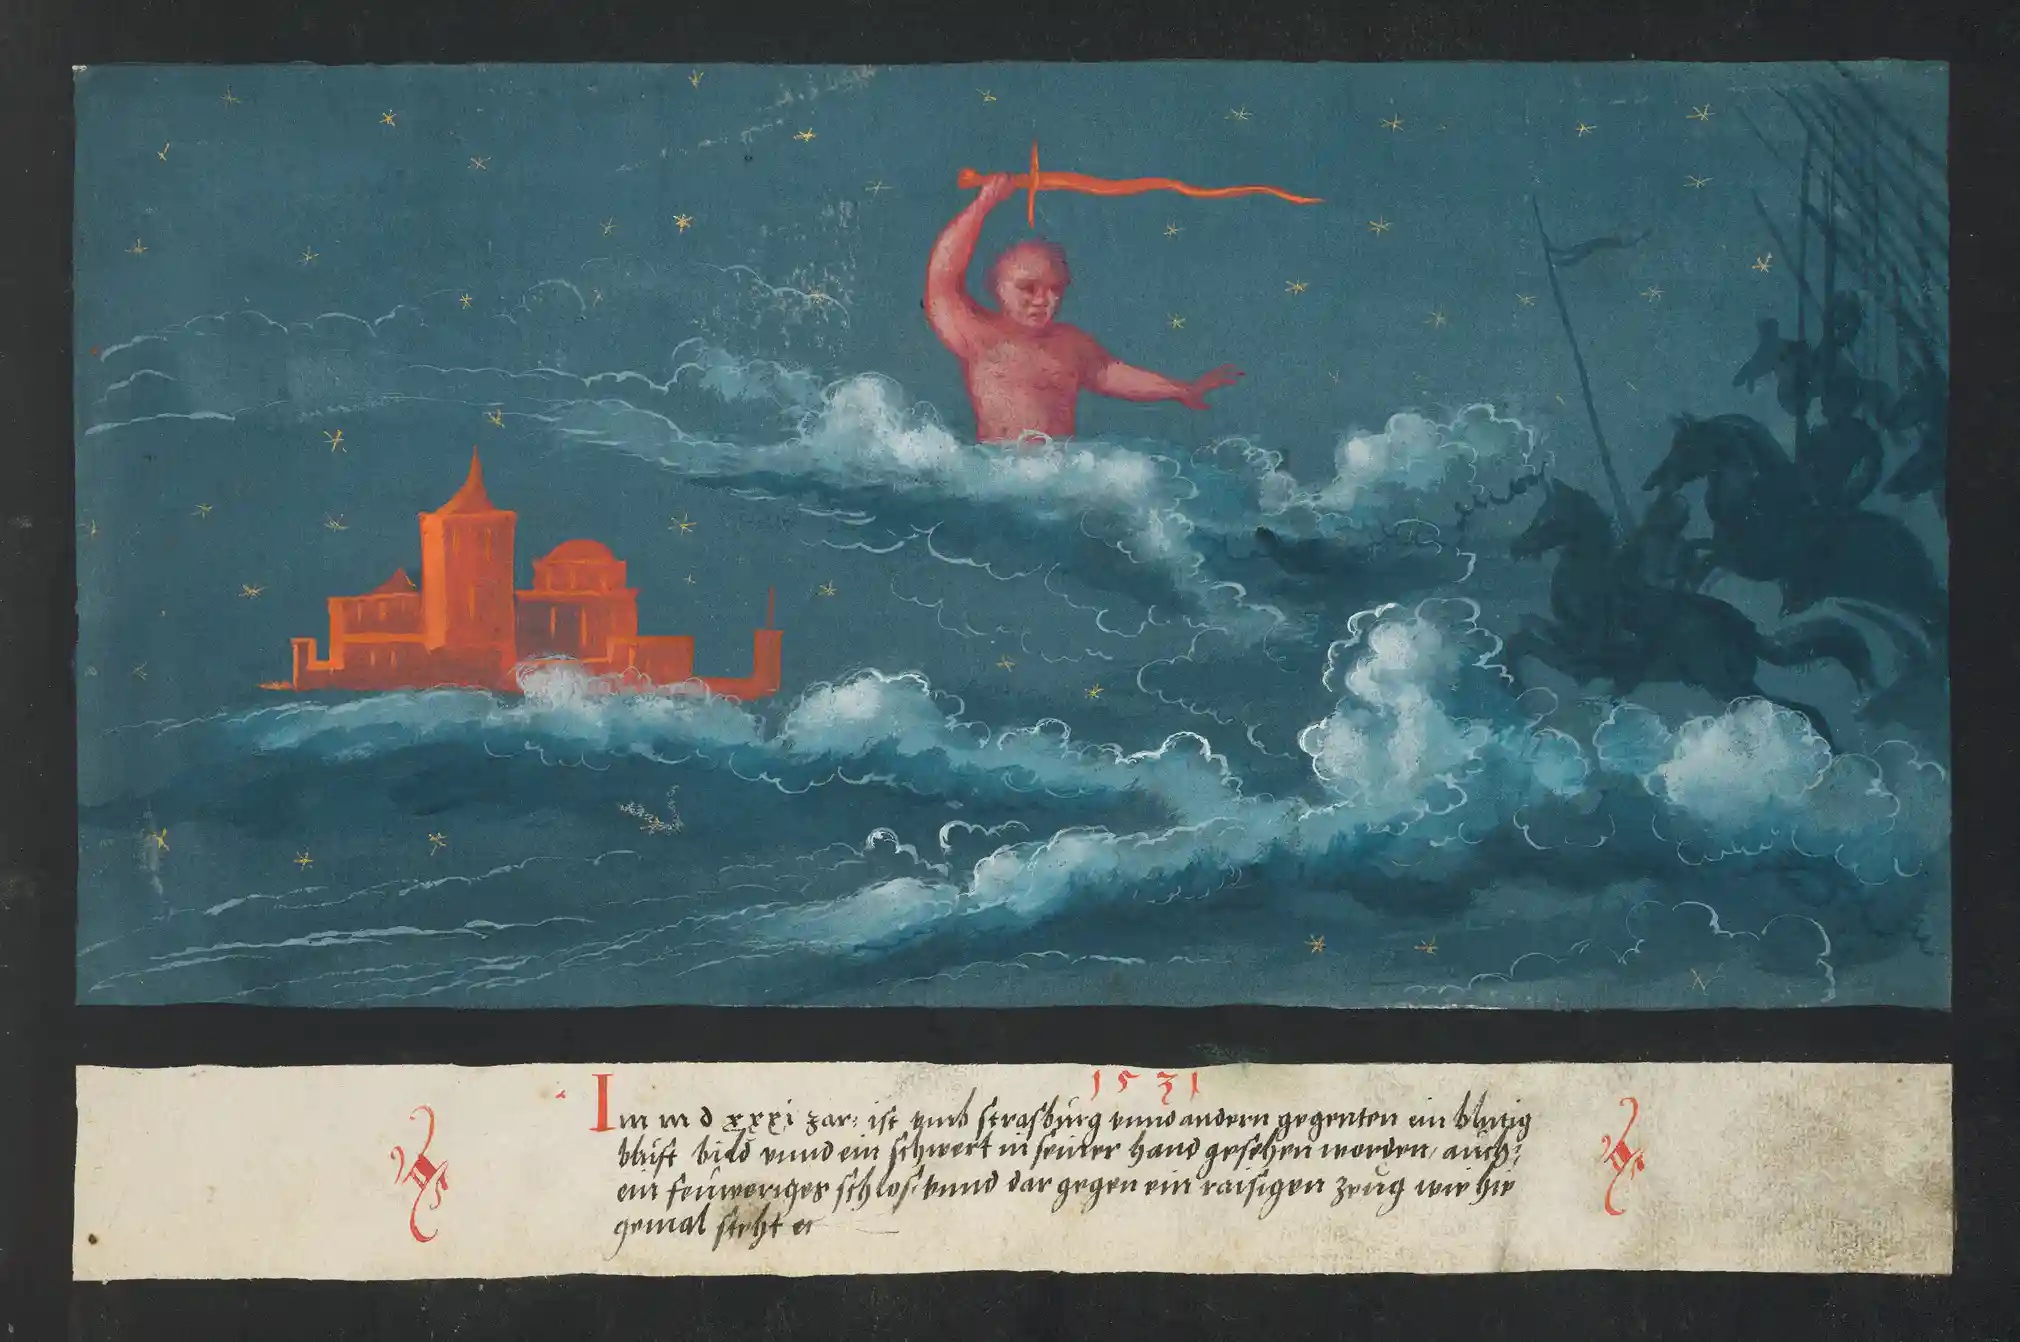 Behold the Augsburg Book of Miracles, a Brilliantly-Illuminated